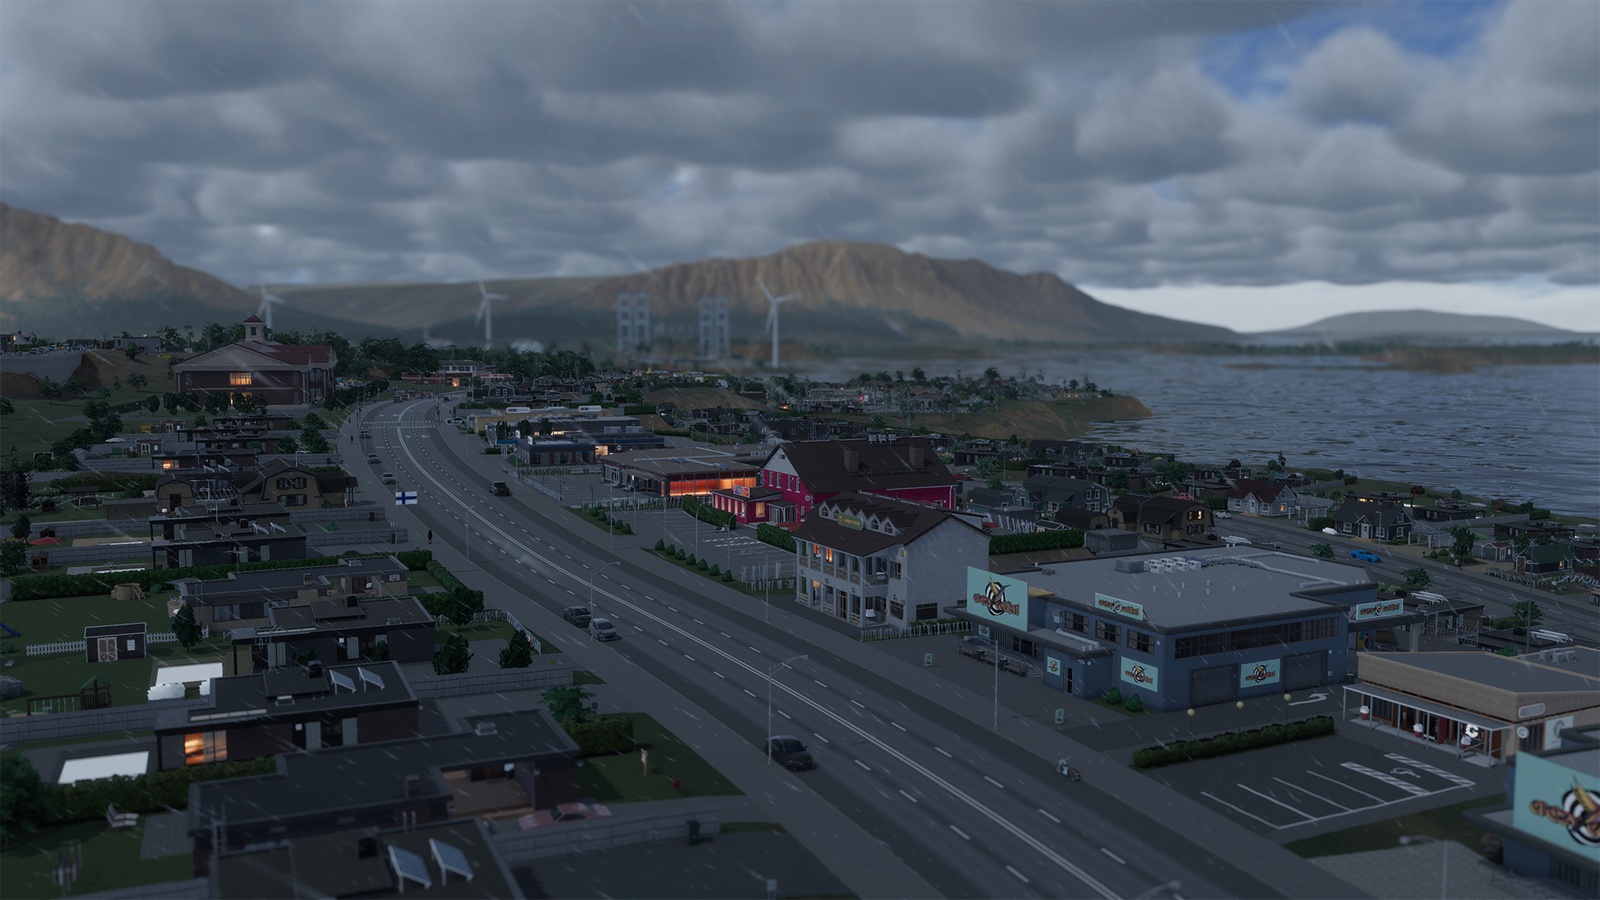 Cities Skylines 2 Dev Targets 30FPS: 'There's No Real Benefit in a